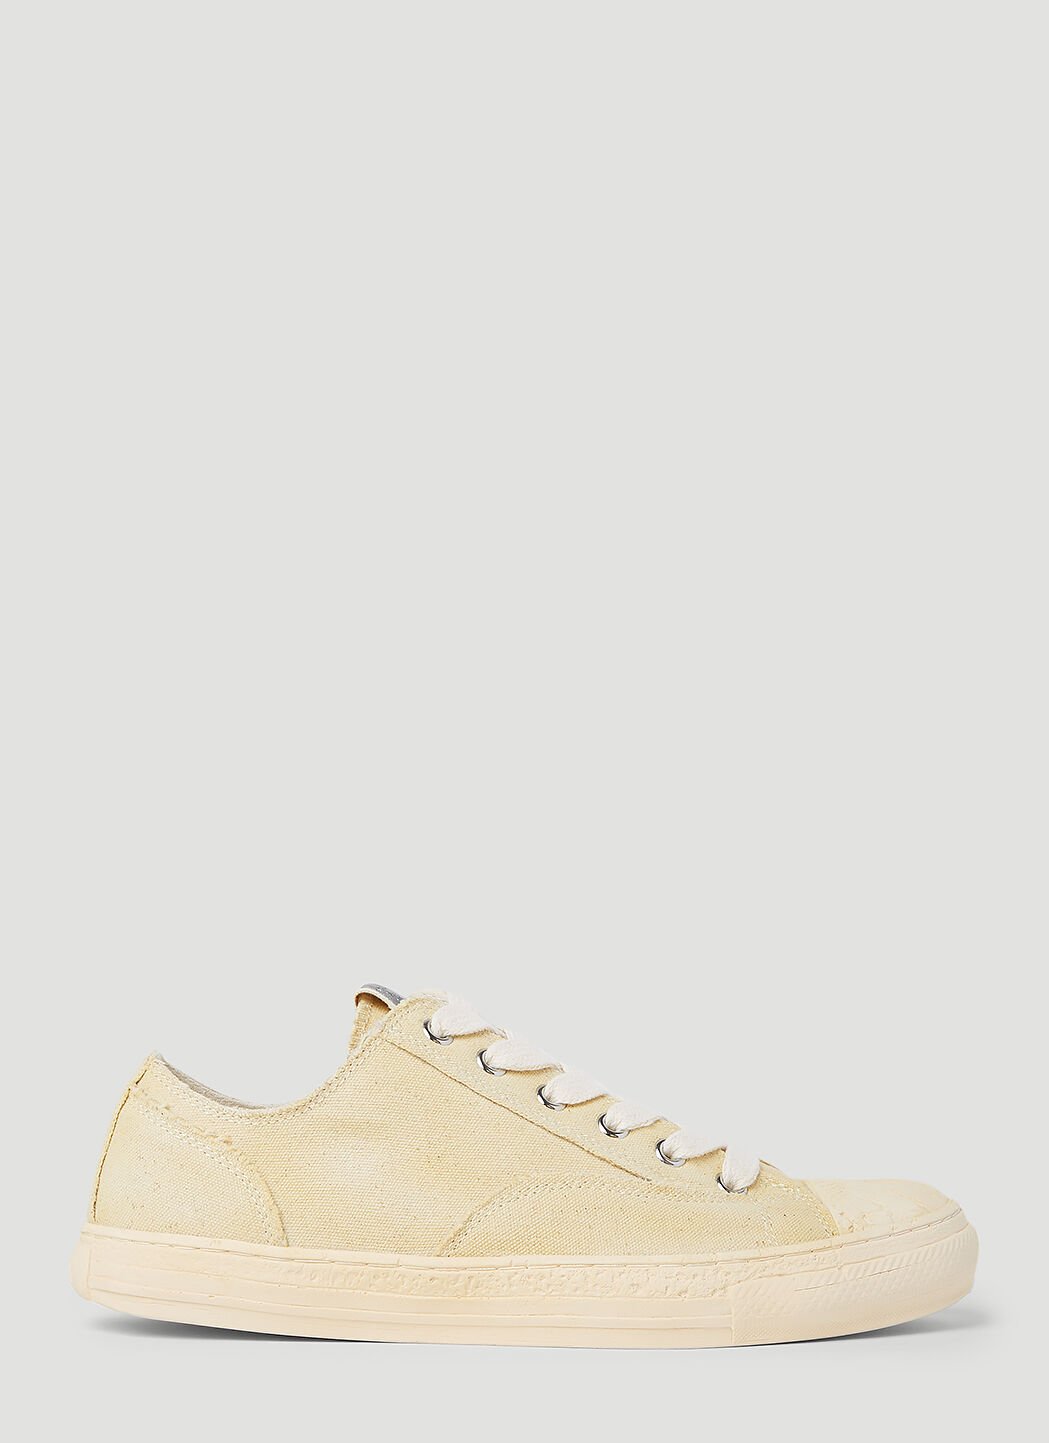 Maison Mihara Yasuhiro Past Sole Over Dye Low Top Sneakers Cream mmy0156007